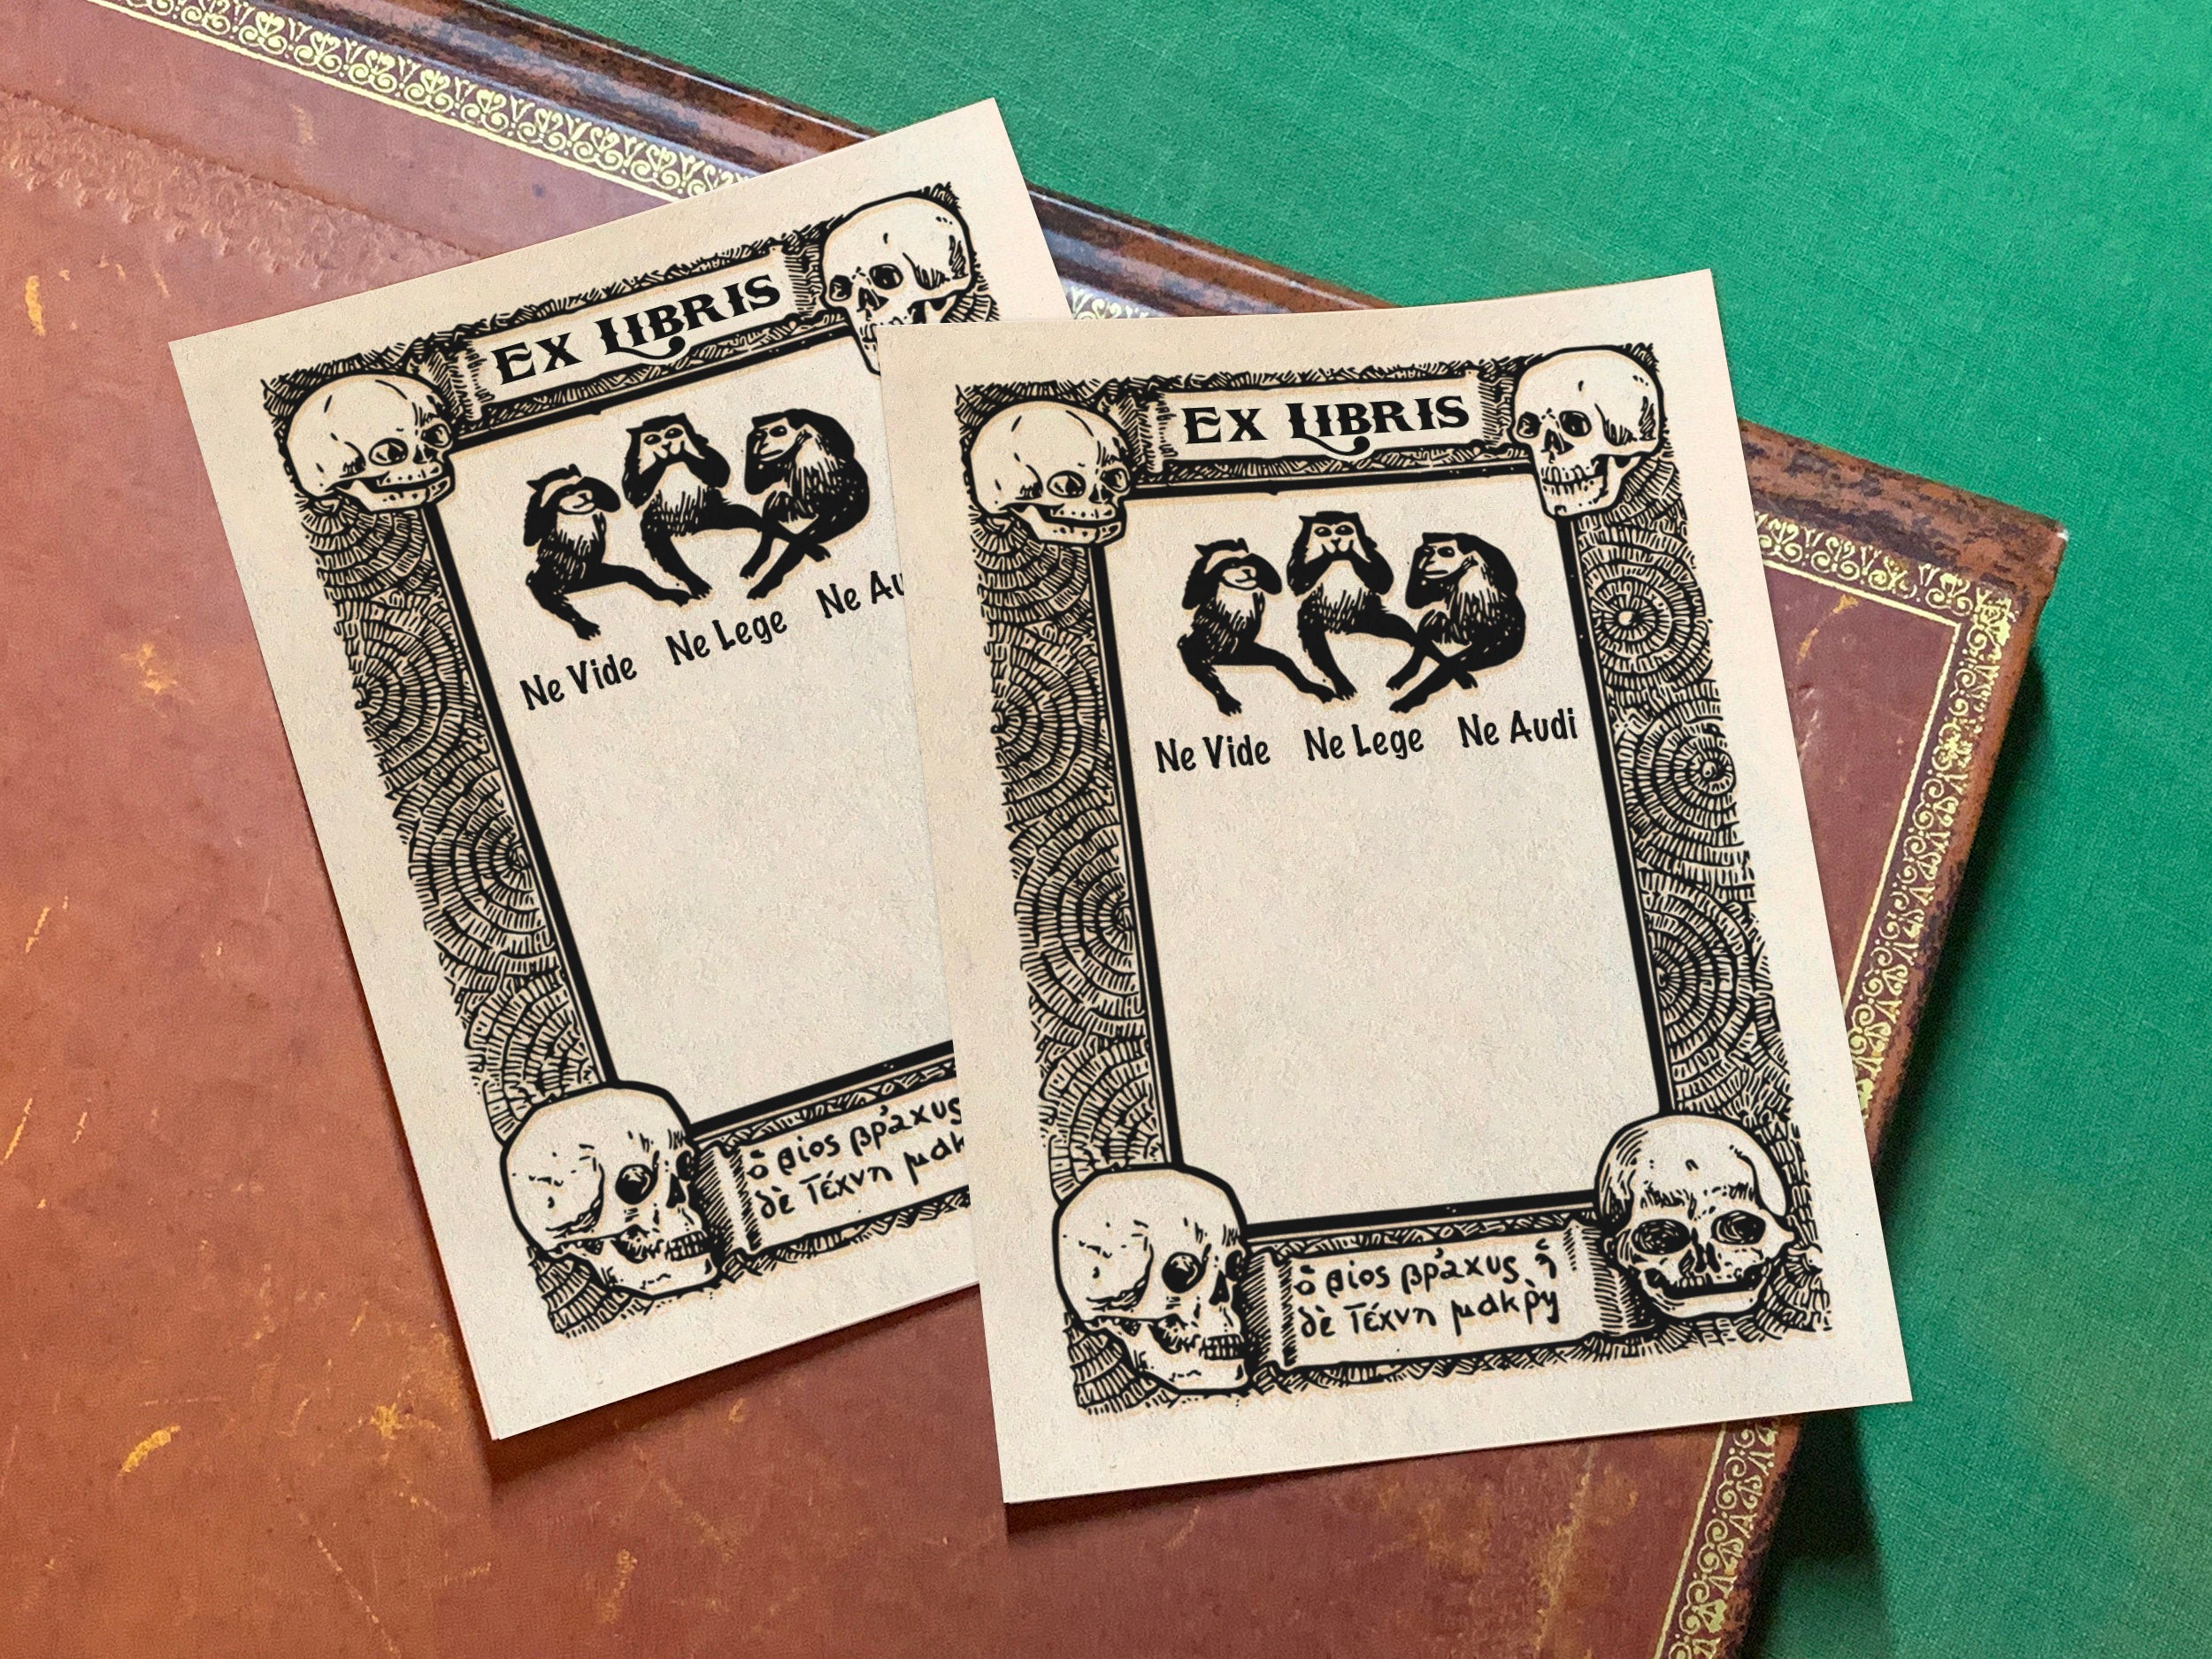 Three Wise Monkeys, Personalized Ex-Libris Bookplates, Crafted on Traditional Gummed Paper, 3in x 4in, Set of 30